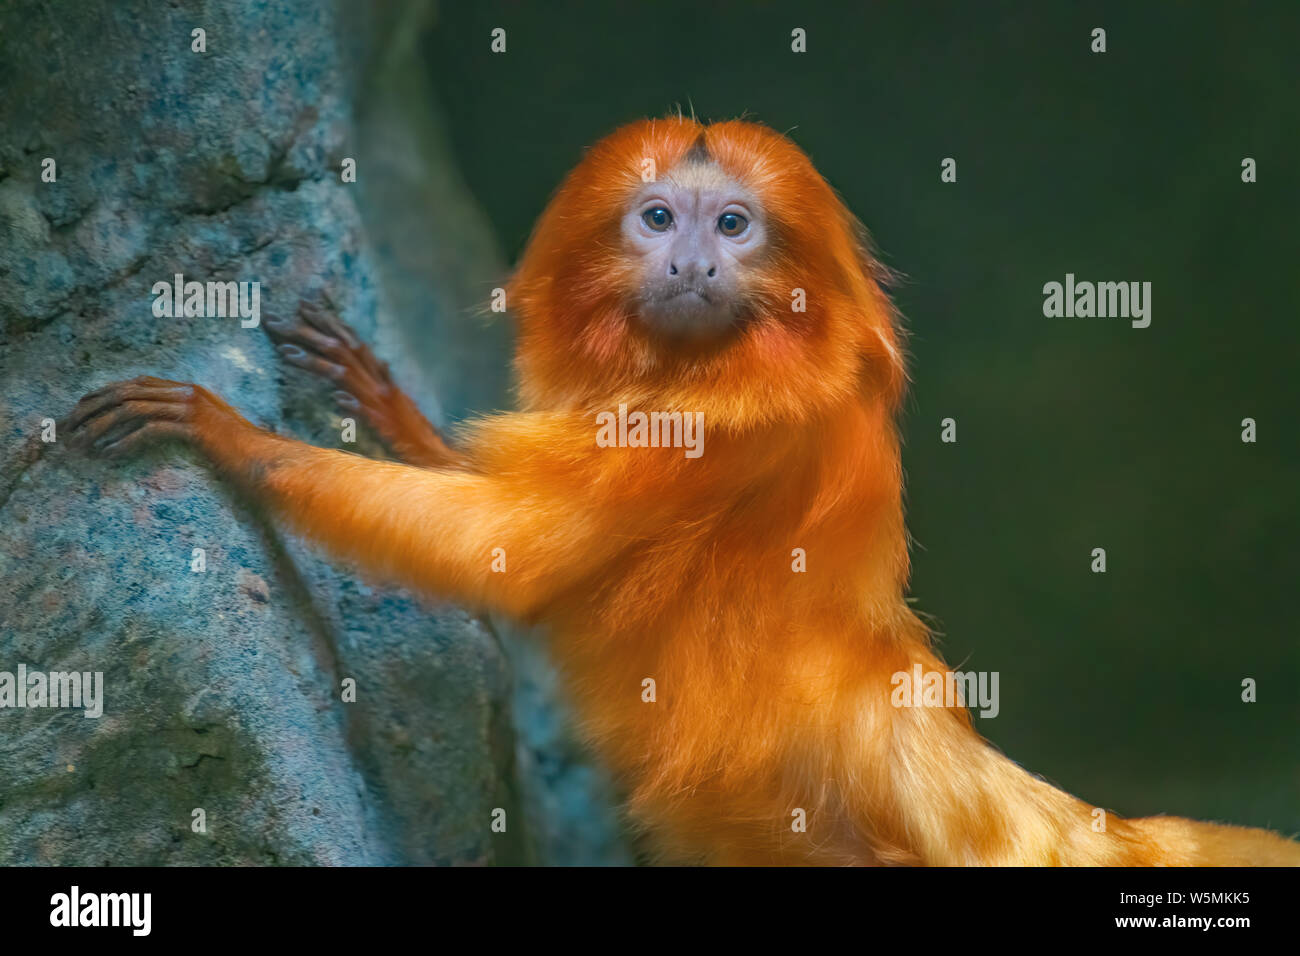 The endangered Golden Lion Tamarin lives in tropical forests of South America. Stock Photo